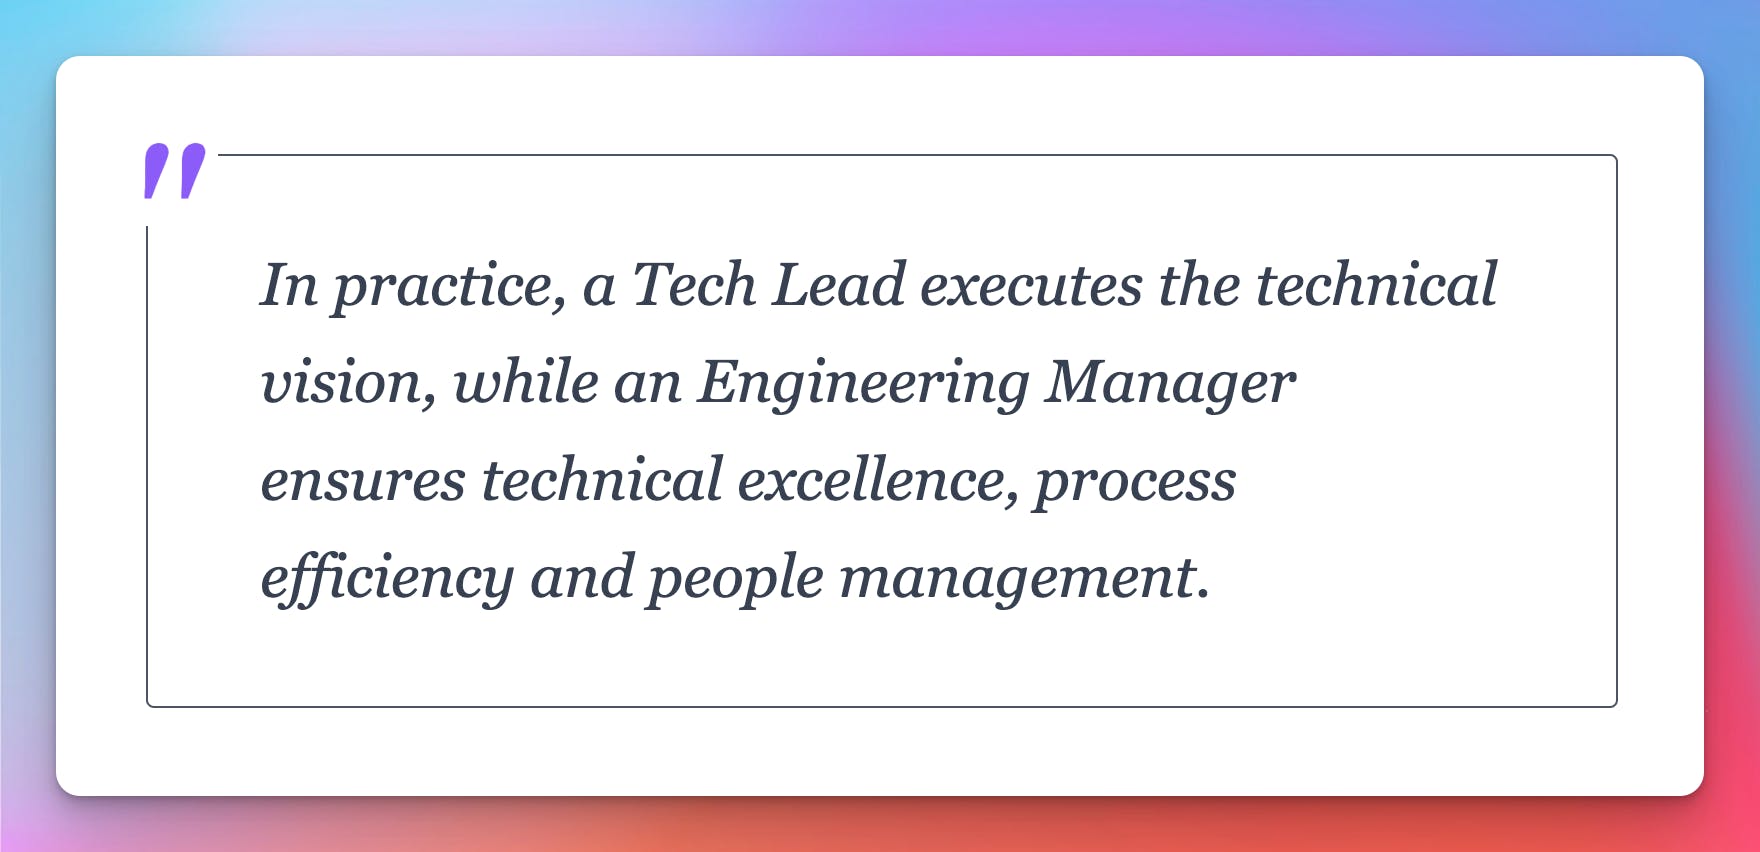 In practice, a Tech Lead executes the technical vision, while an Engineering Manager ensures technical excellence, process efficiency and people management.